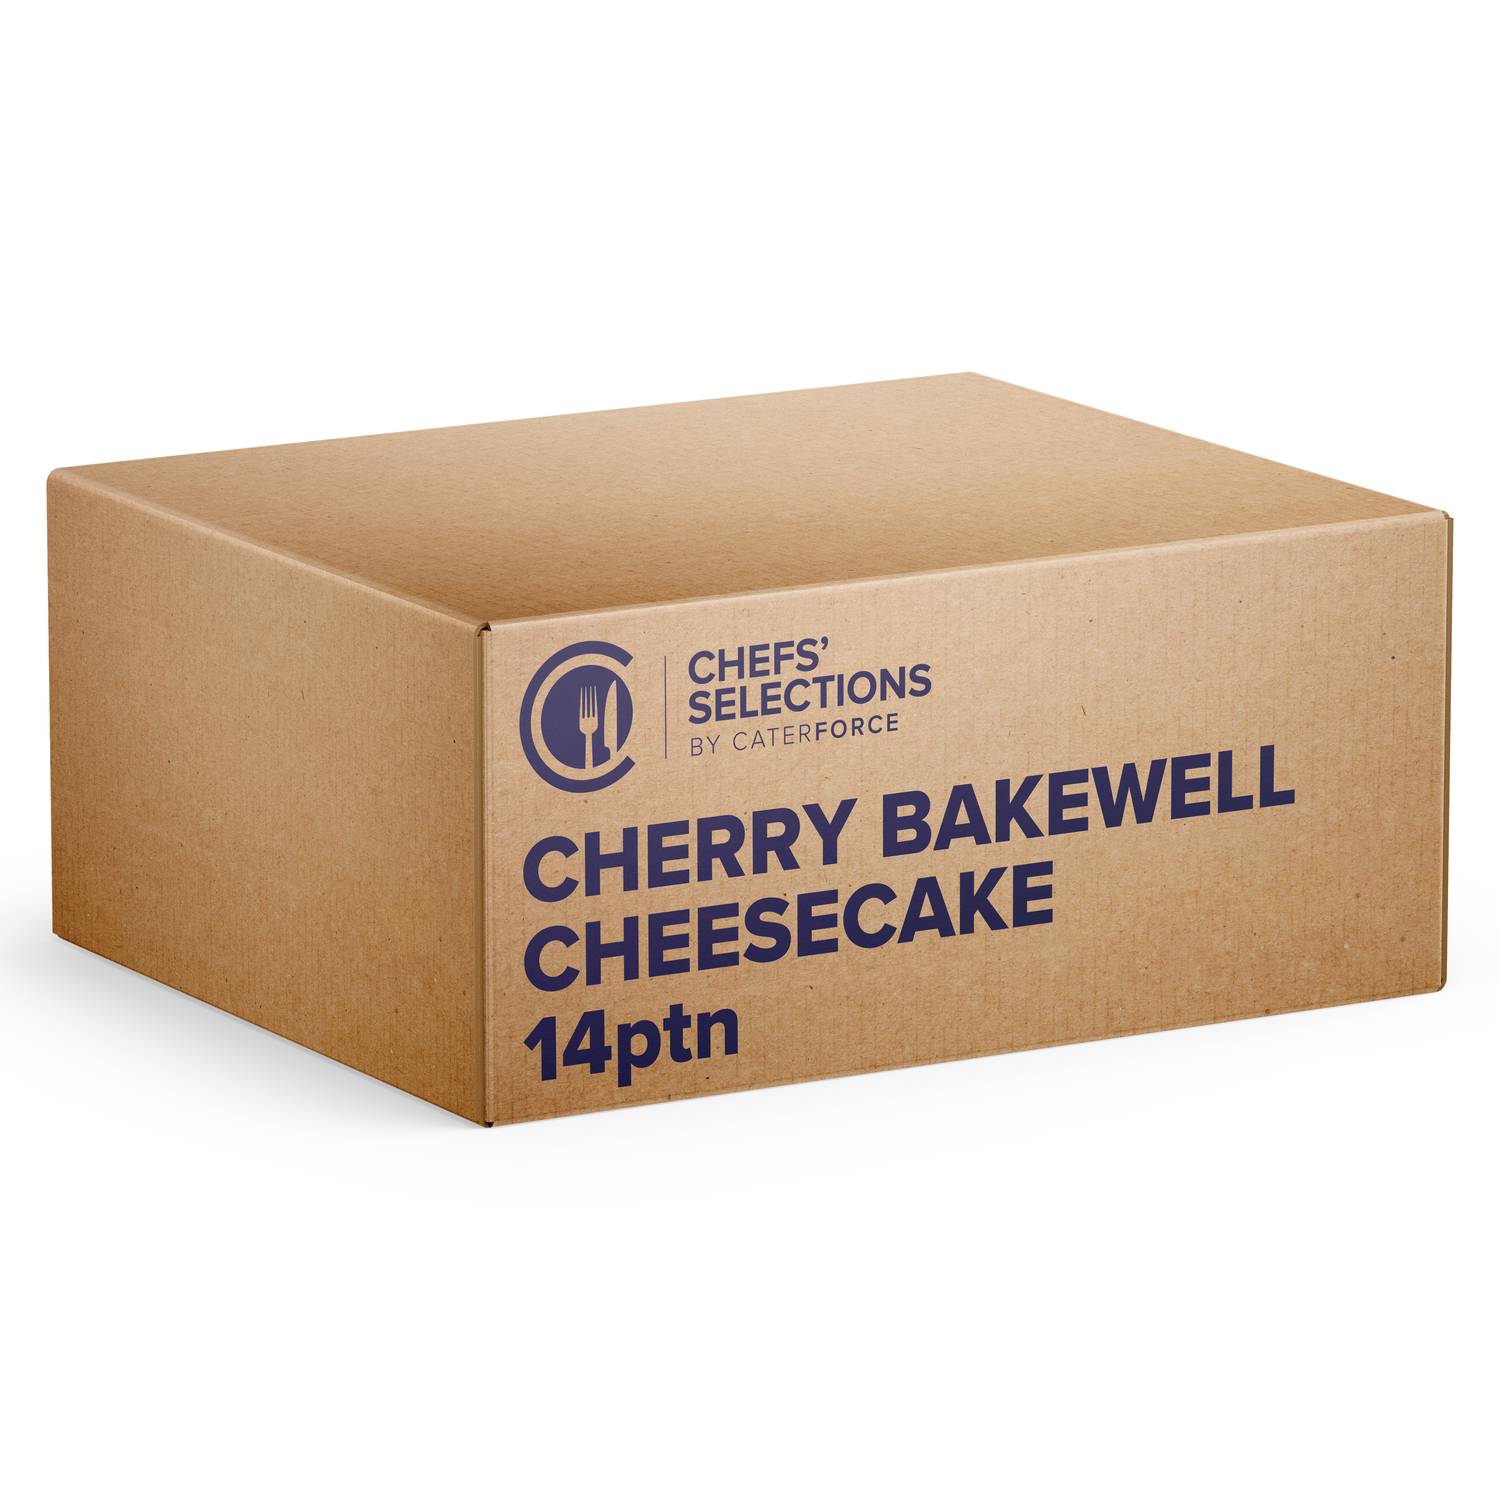 Chefs’ Selections Cherry Bakewell Cheesecake (1 x 14p/ptn)